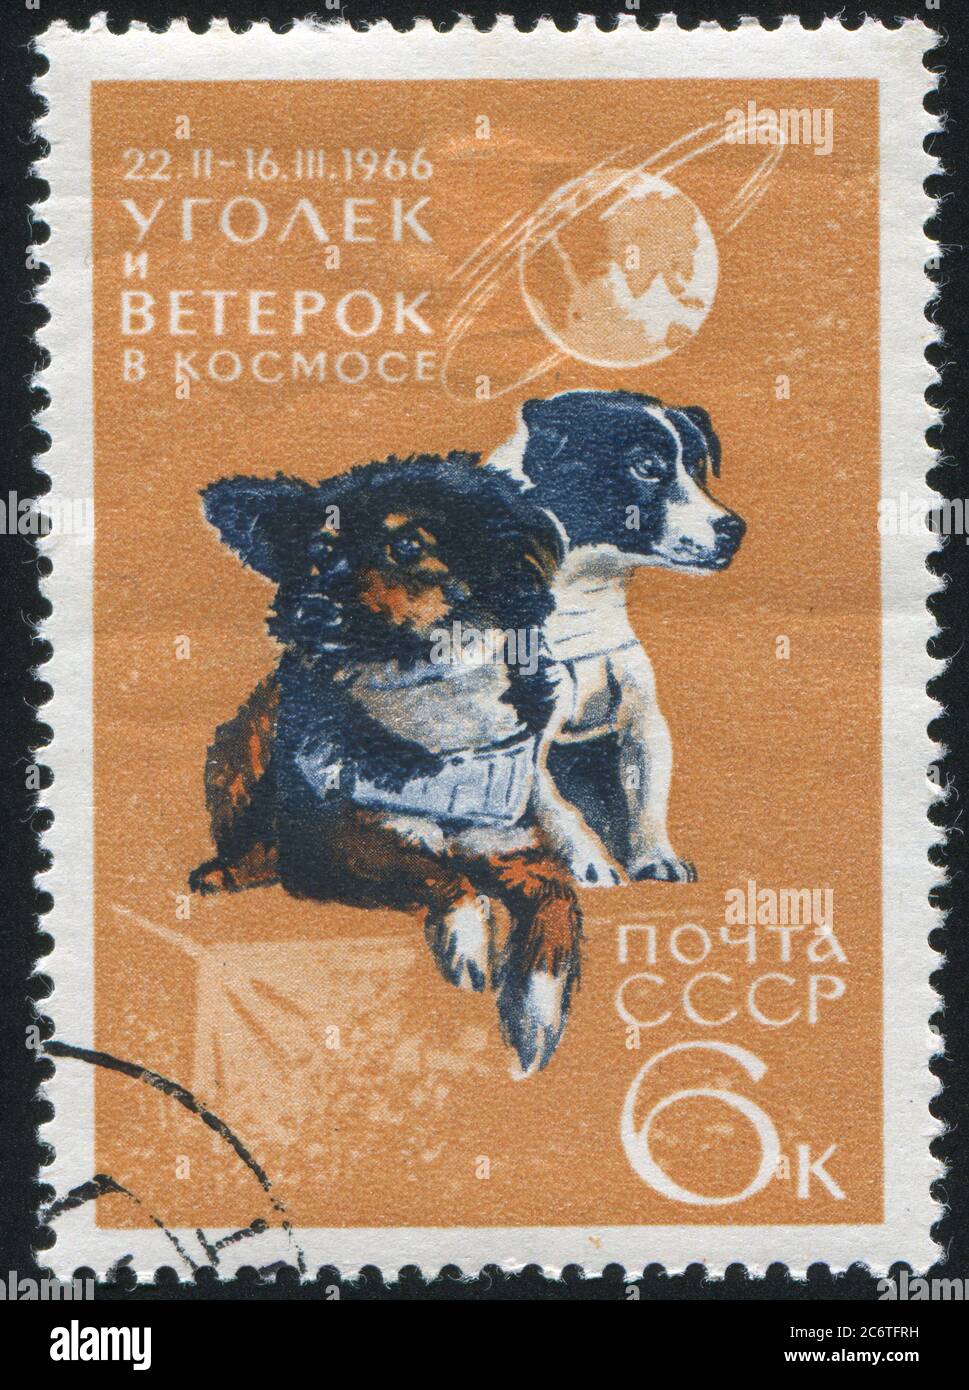 RUSSIA - CIRCA 1966: stamp printed by Russia, shows Dogs Ugolek and Veterok after Space Flight, circa 1966 Stock Photo